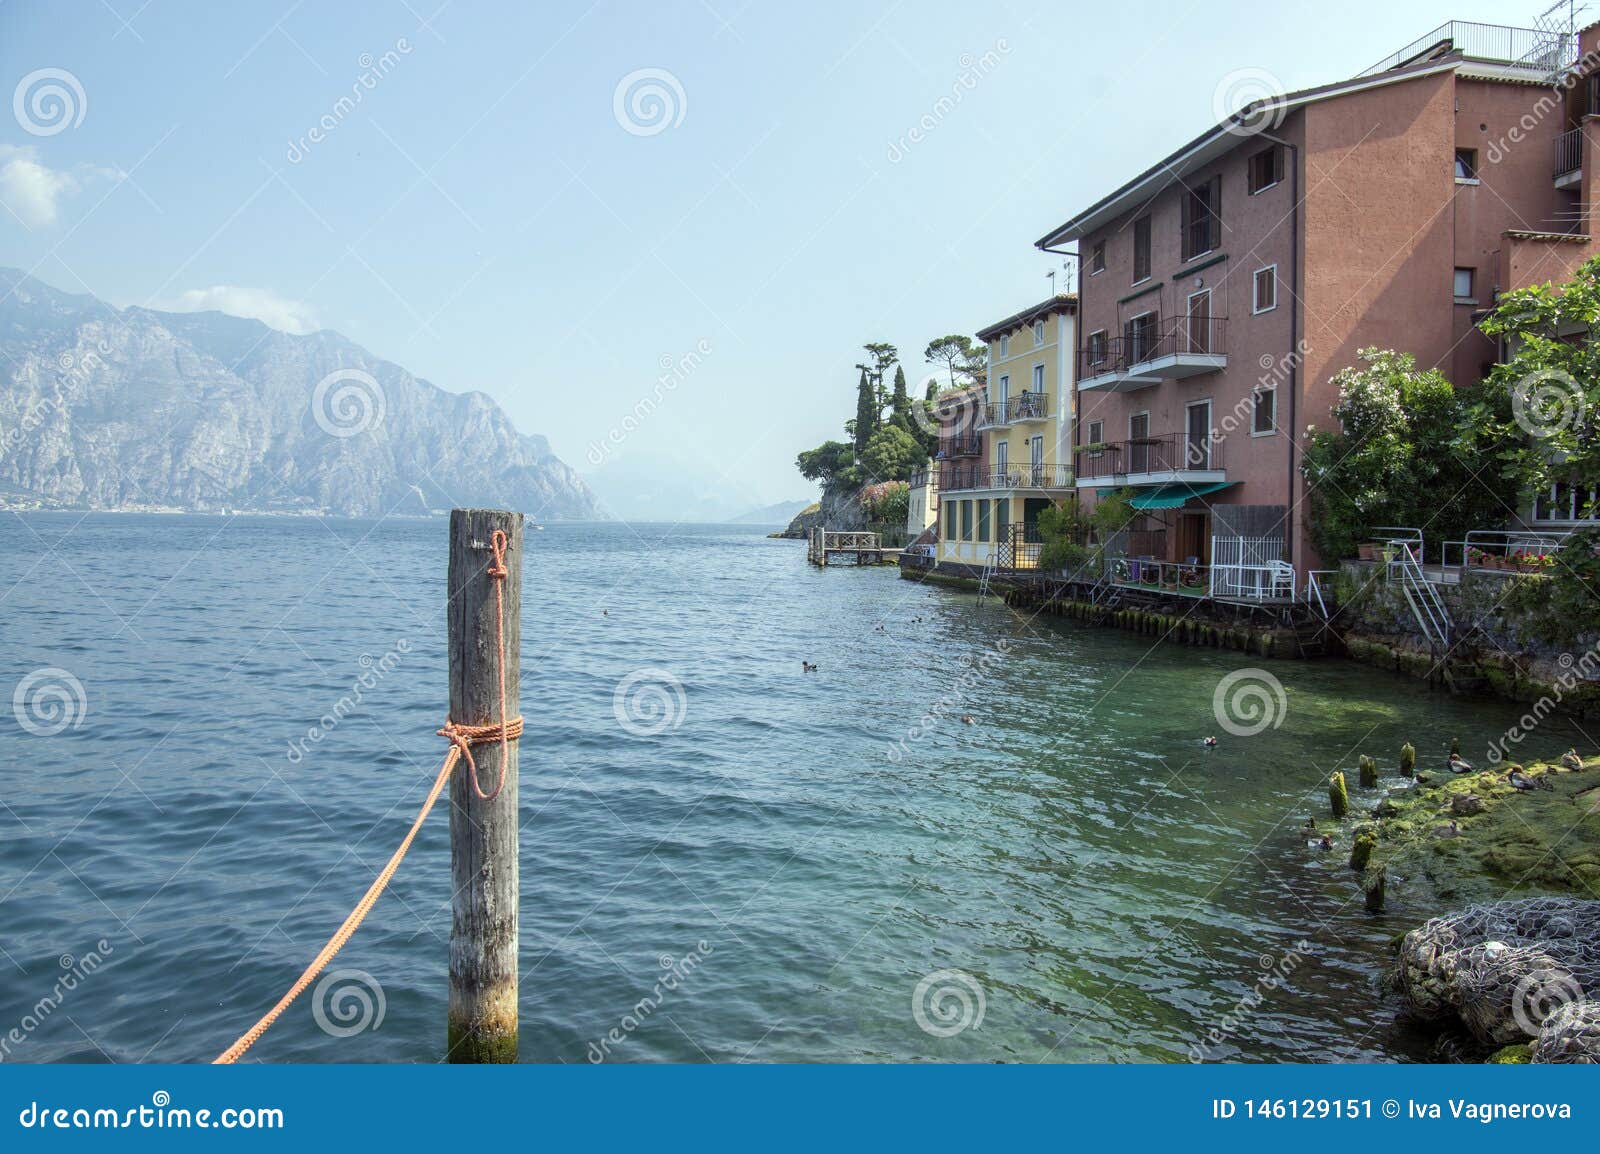 wooden bricole for boats in the water, lake lago di garda, morning light, mountains on the background